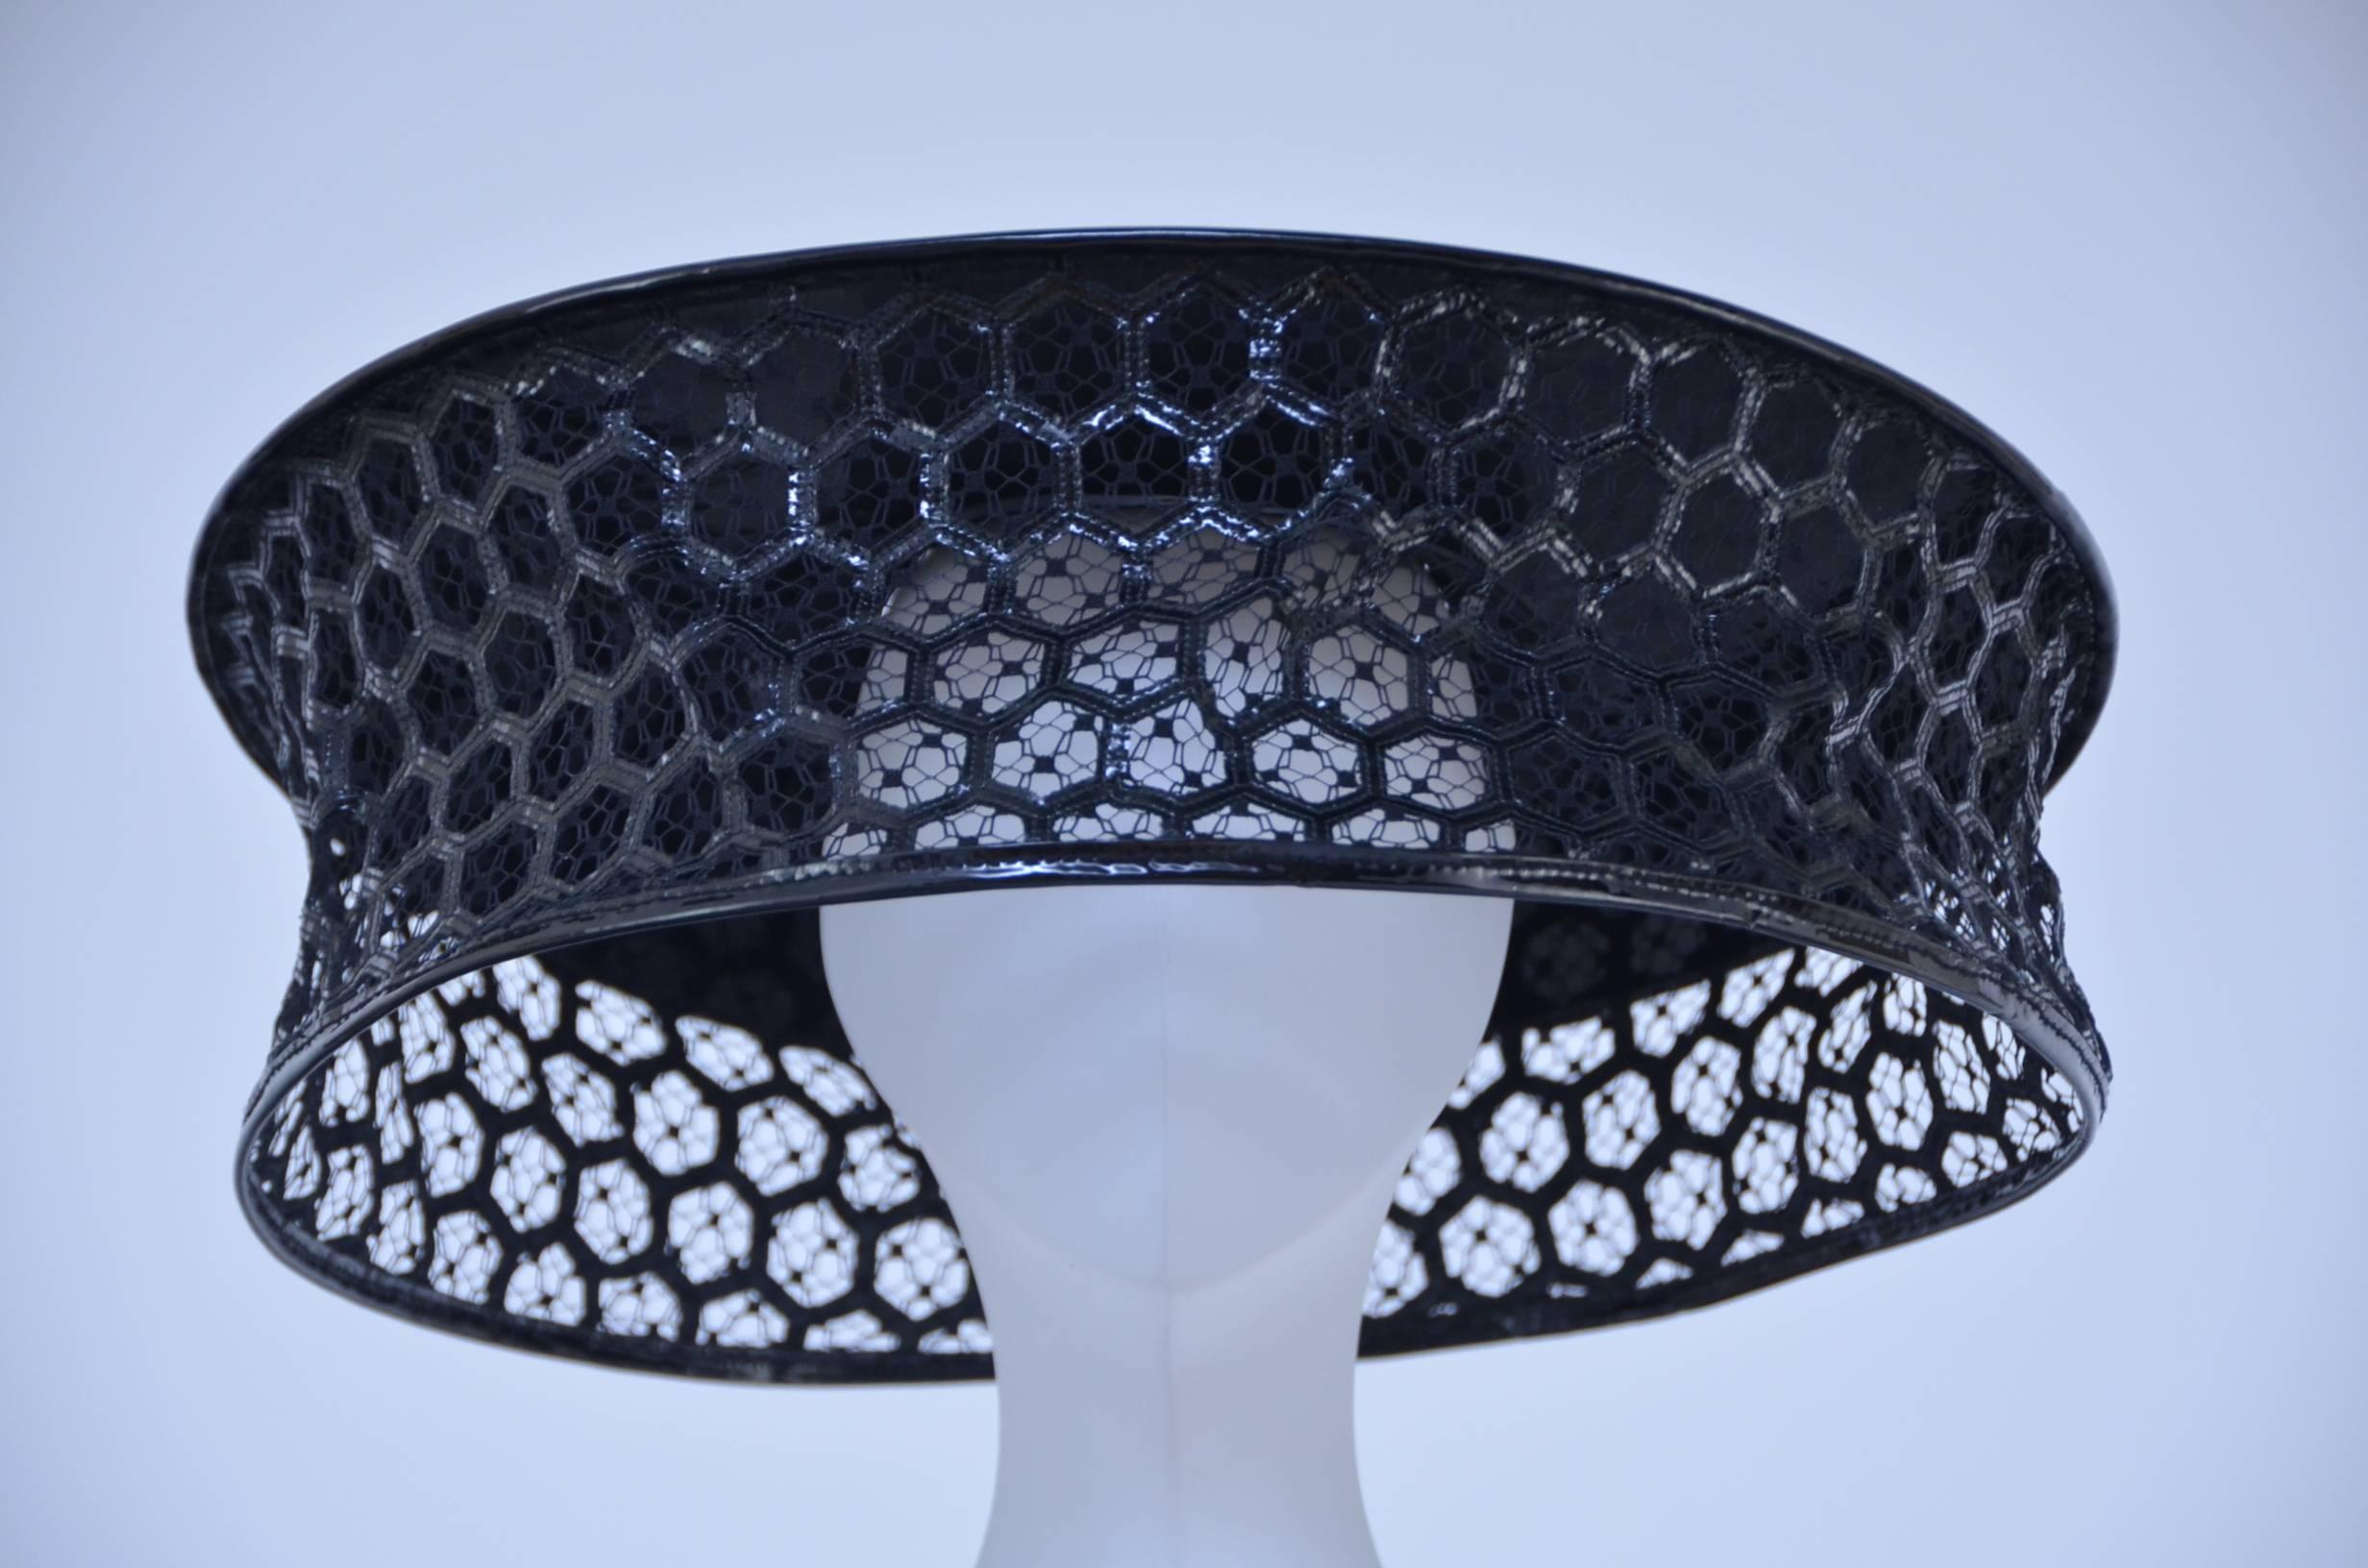 Sarah Burton's  awe-inspiring designs exhilarate the avant-garde aesthetic, fashion's most avid followers has been  seen wearing this  beekeeper-inspired hat. Boasting the inimitable honeycomb patterning that was interwoven throughout the entire